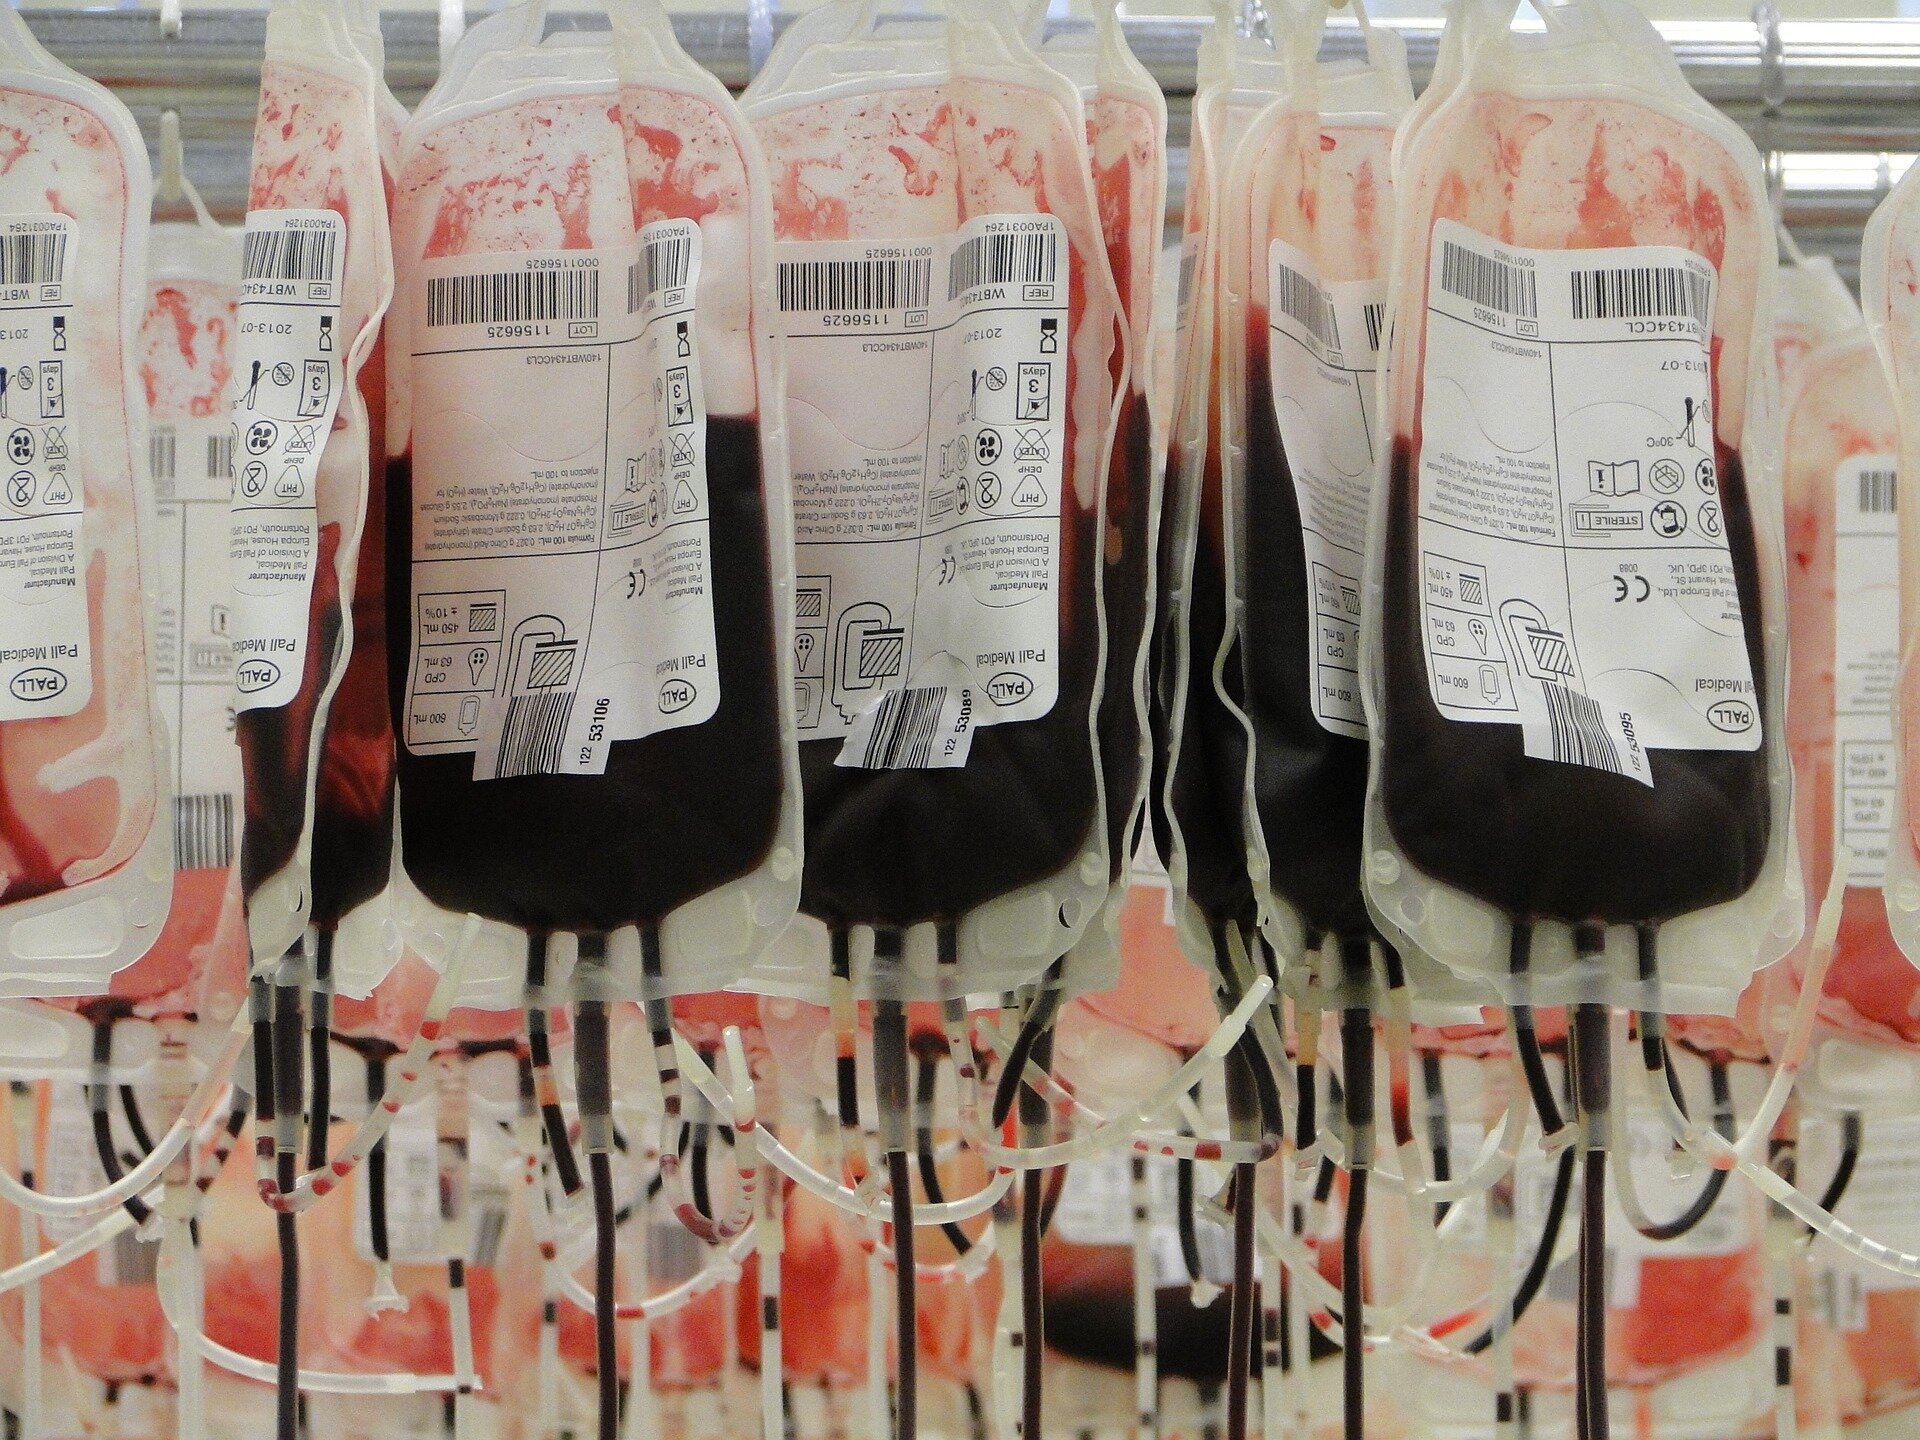 New research shows luspatercept enables majority of patients with MDS to end reliance on blood transfusions